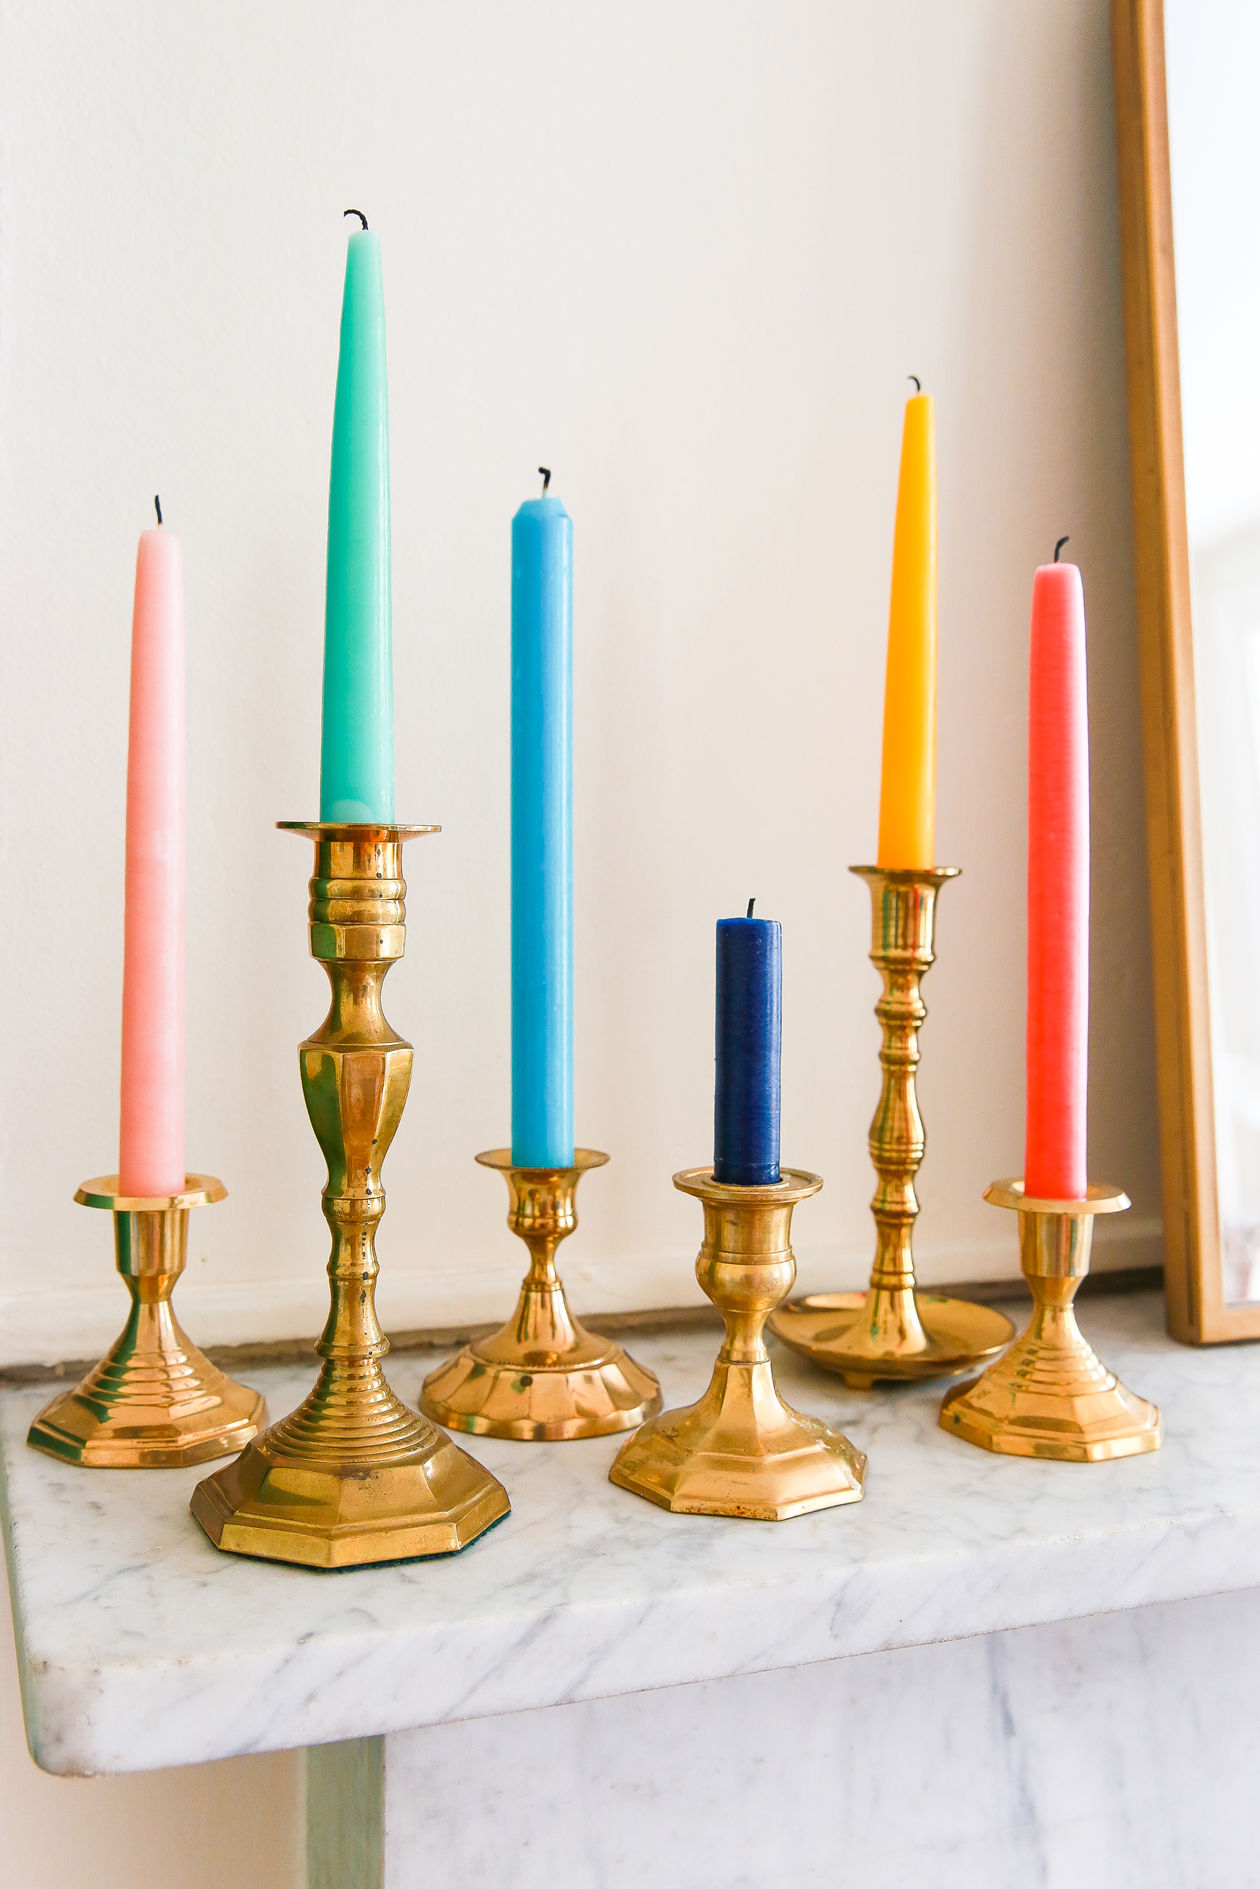 Colorful taper candles are great for any dinner party, wedding, or even just as home decor. They're a timeless piece of home decor that will never be out of style, so be sure to add them to your home ASAP. Here are my favorite taper candle picks from Etsy!